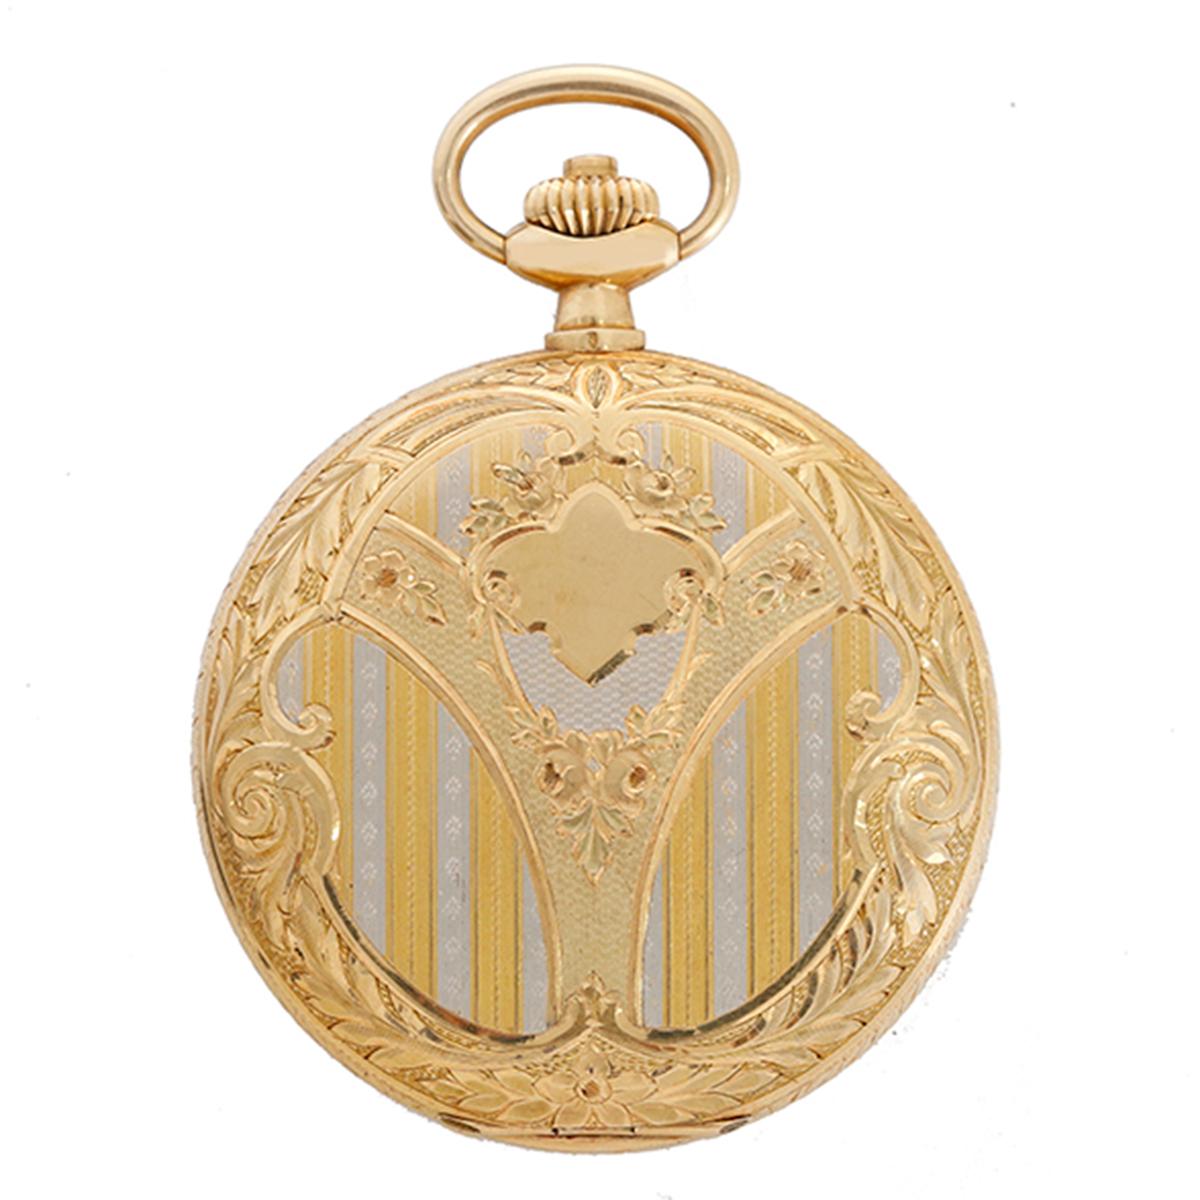 Vintage Omega Engraved 18k Yellow Gold Men's Pocket Watch in Original Box - Manual winding. 18k yellow gold case ornately engraved with alternating stripes of white gold on both front and back (49mm diameter). White enamel dial with bold black Roman